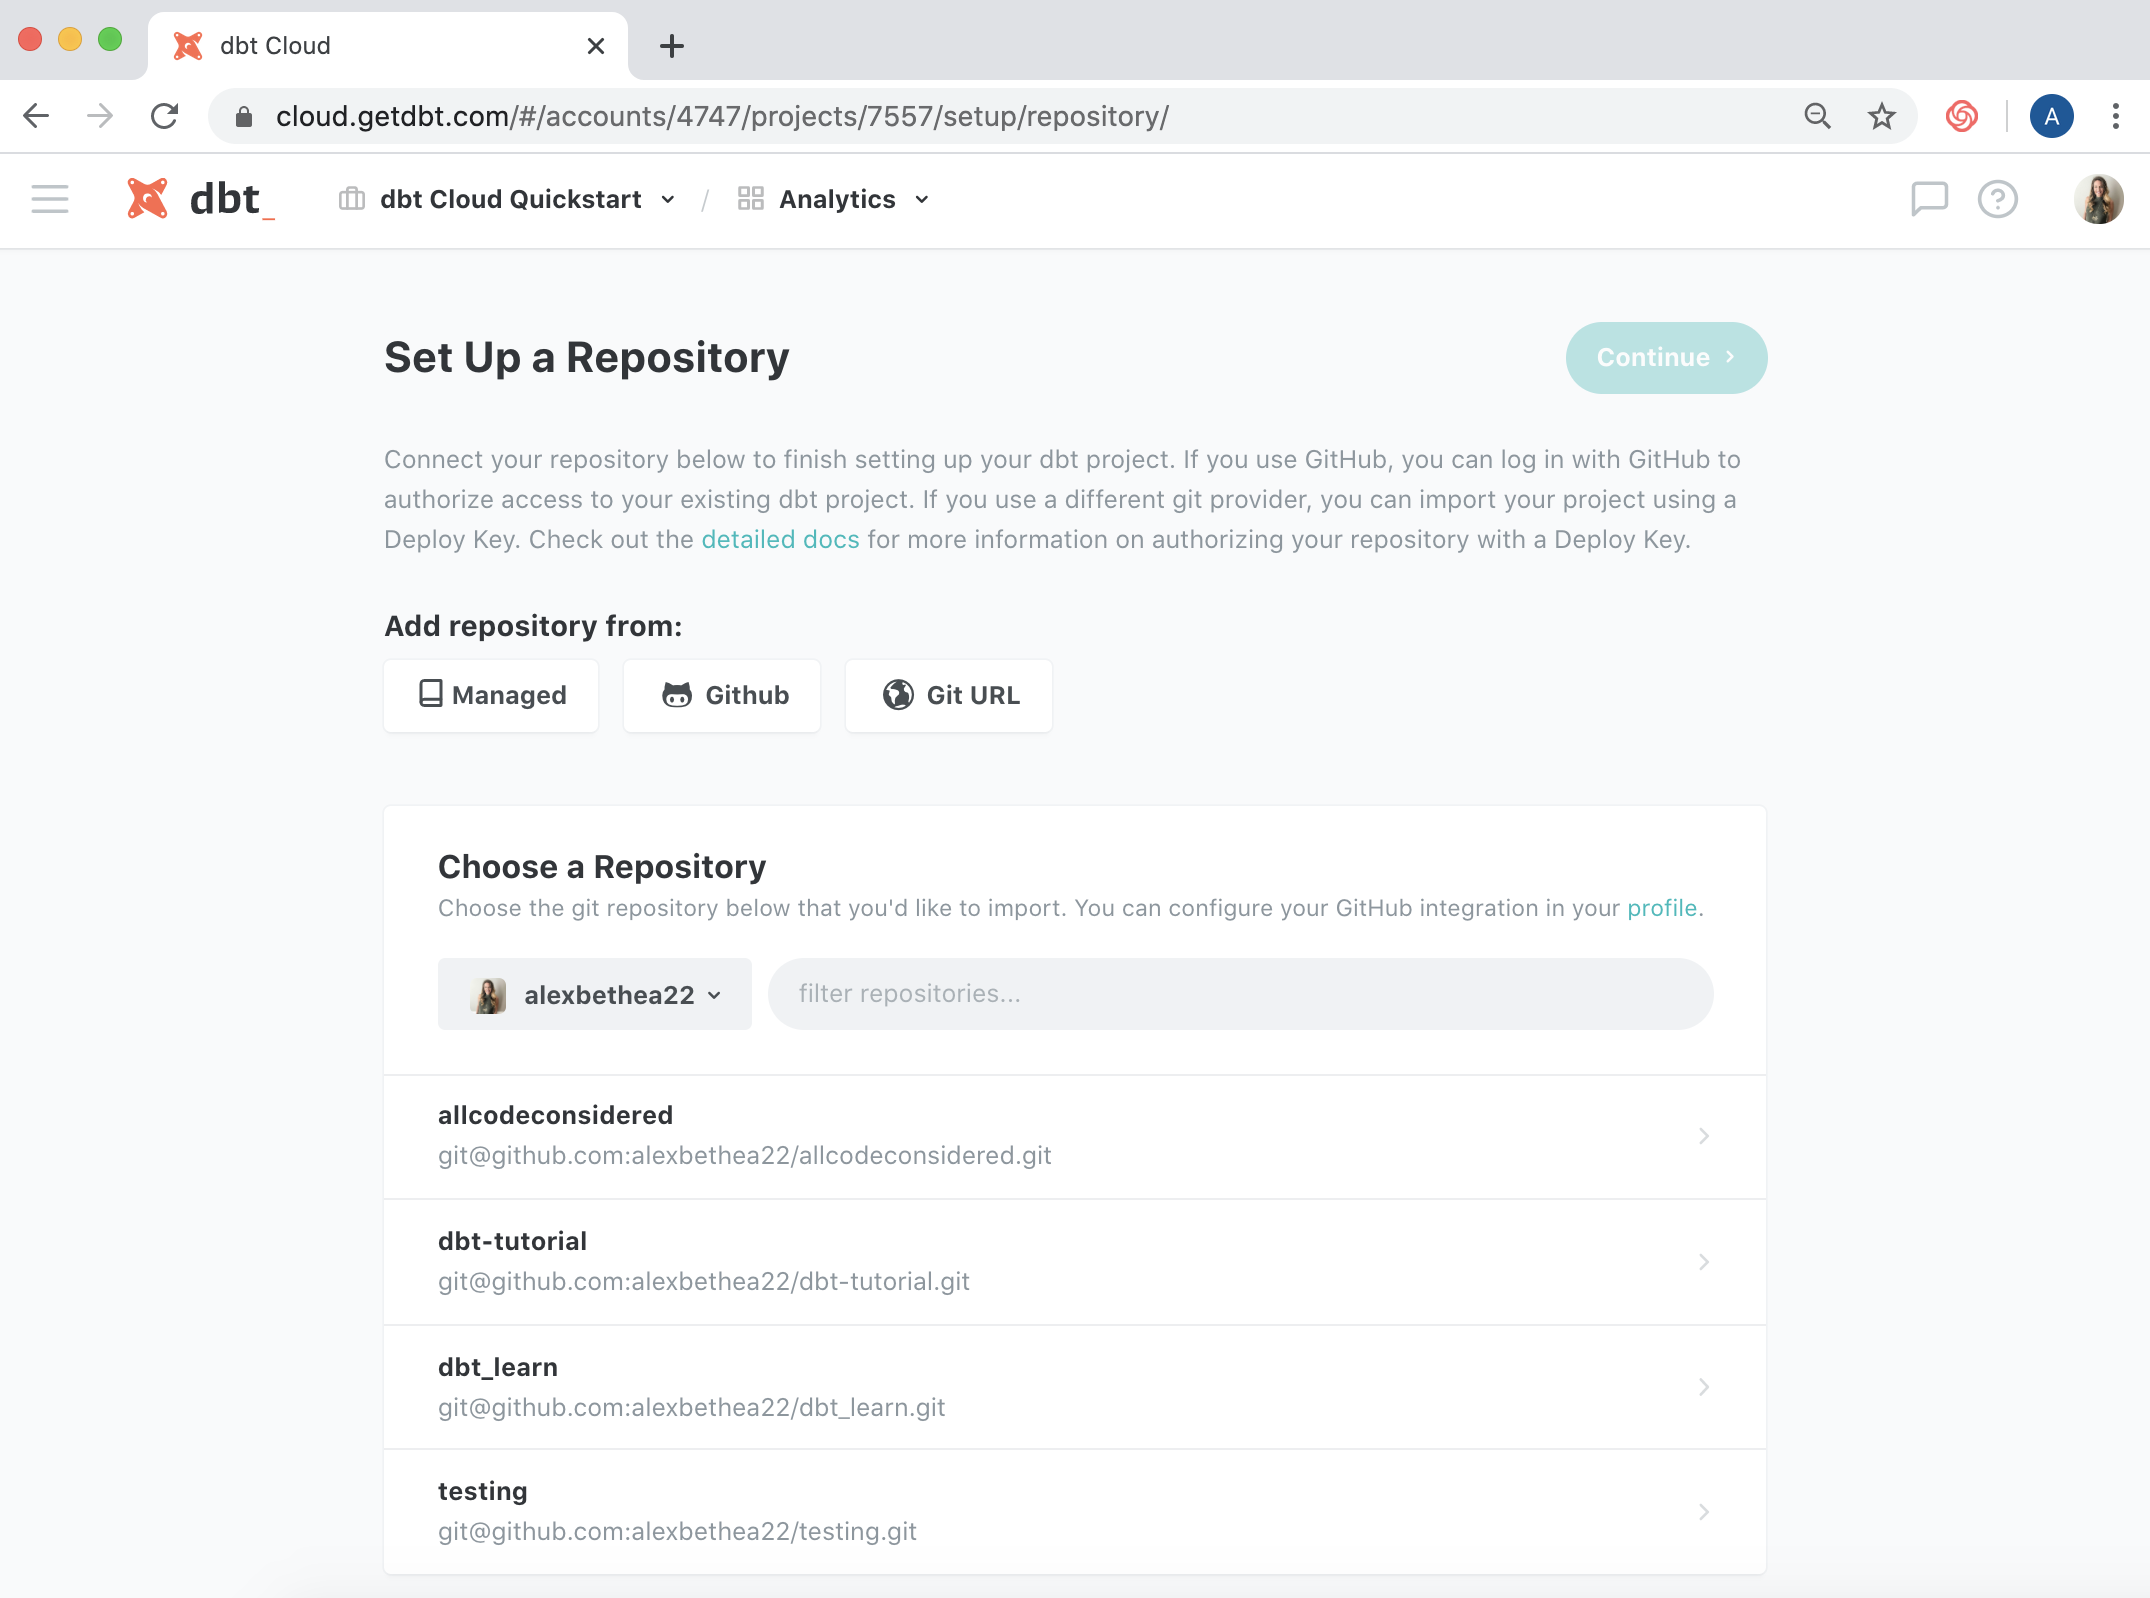 Adding a new repository from GitHub